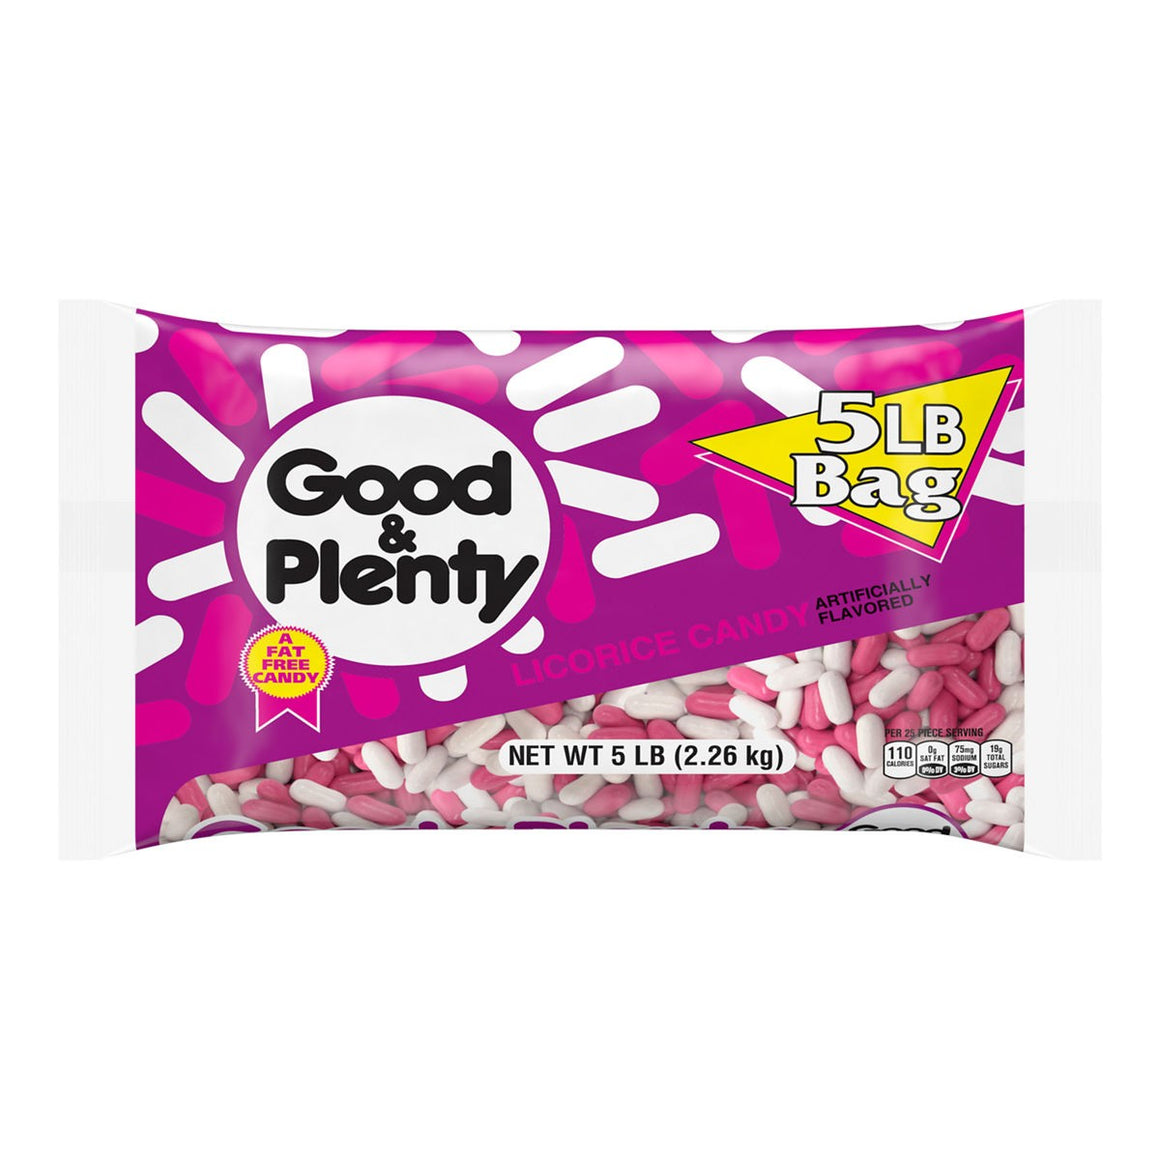 All City Candy Good & Plenty Licorice Candy - 5 LB Bulk Bag Bulk Unwrapped Hershey's For fresh candy and great service, visit www.allcitycandy.com